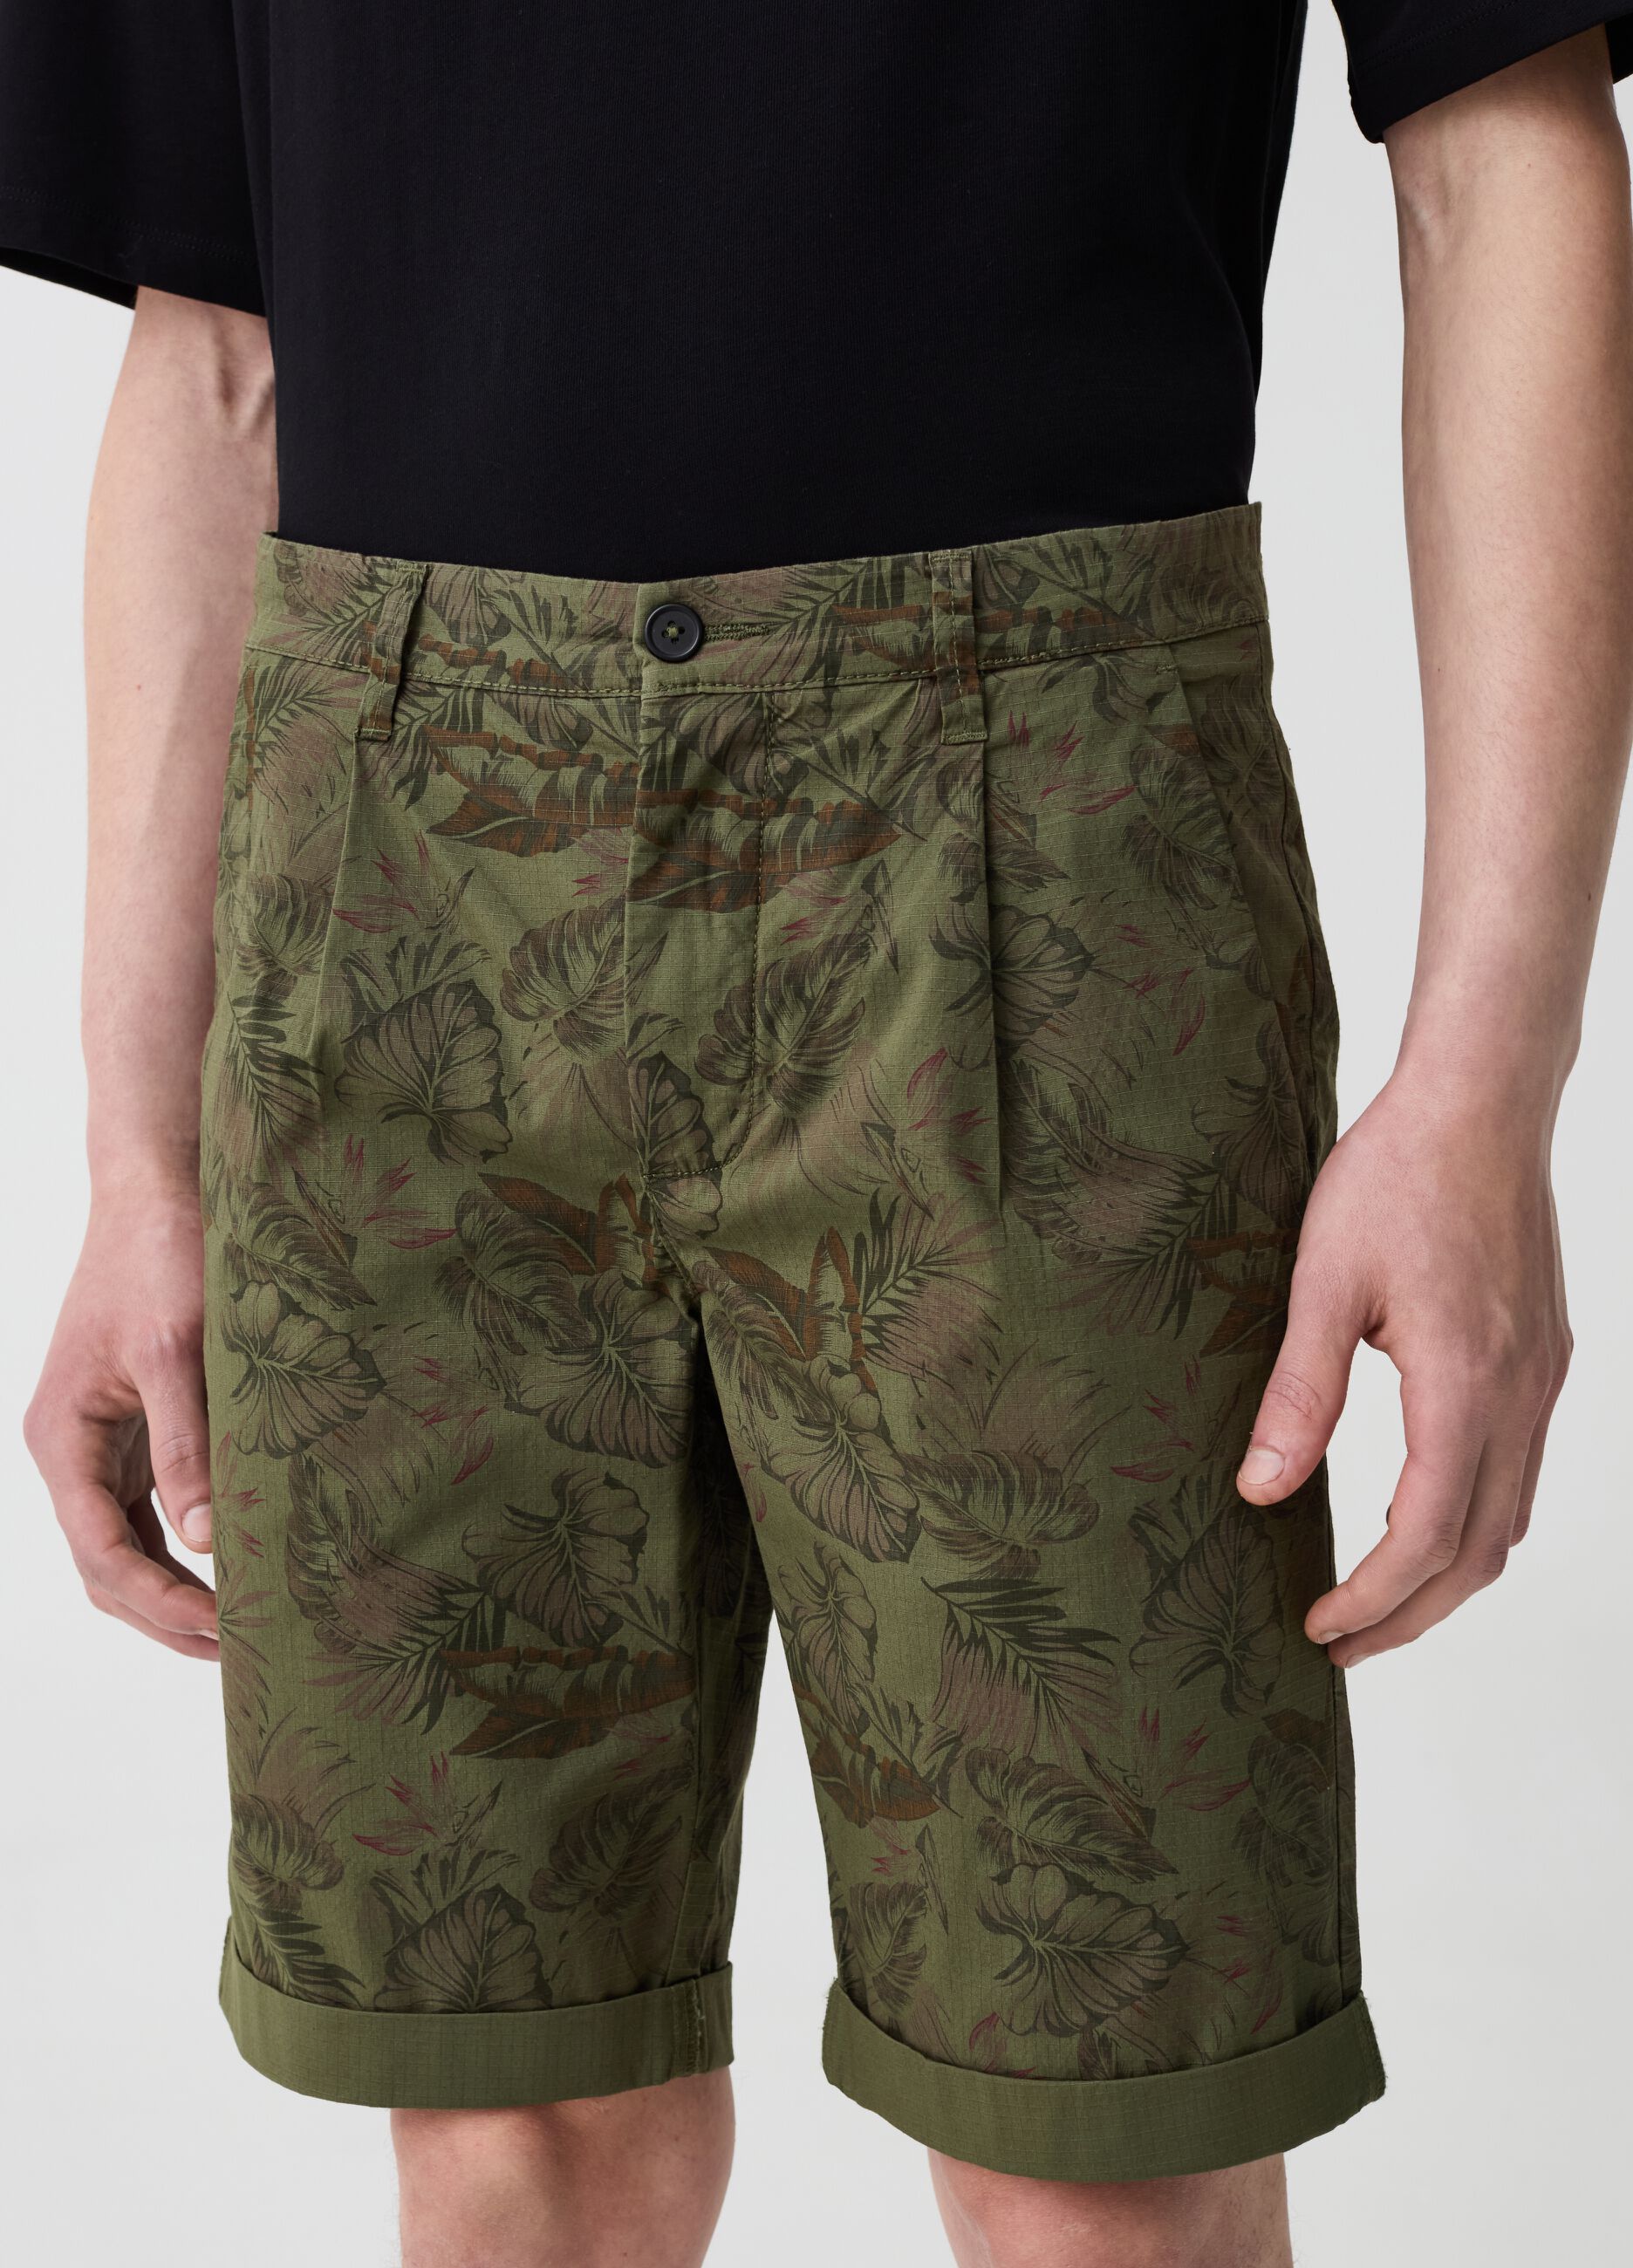 Chino Bermuda shorts with print and ripstop weave